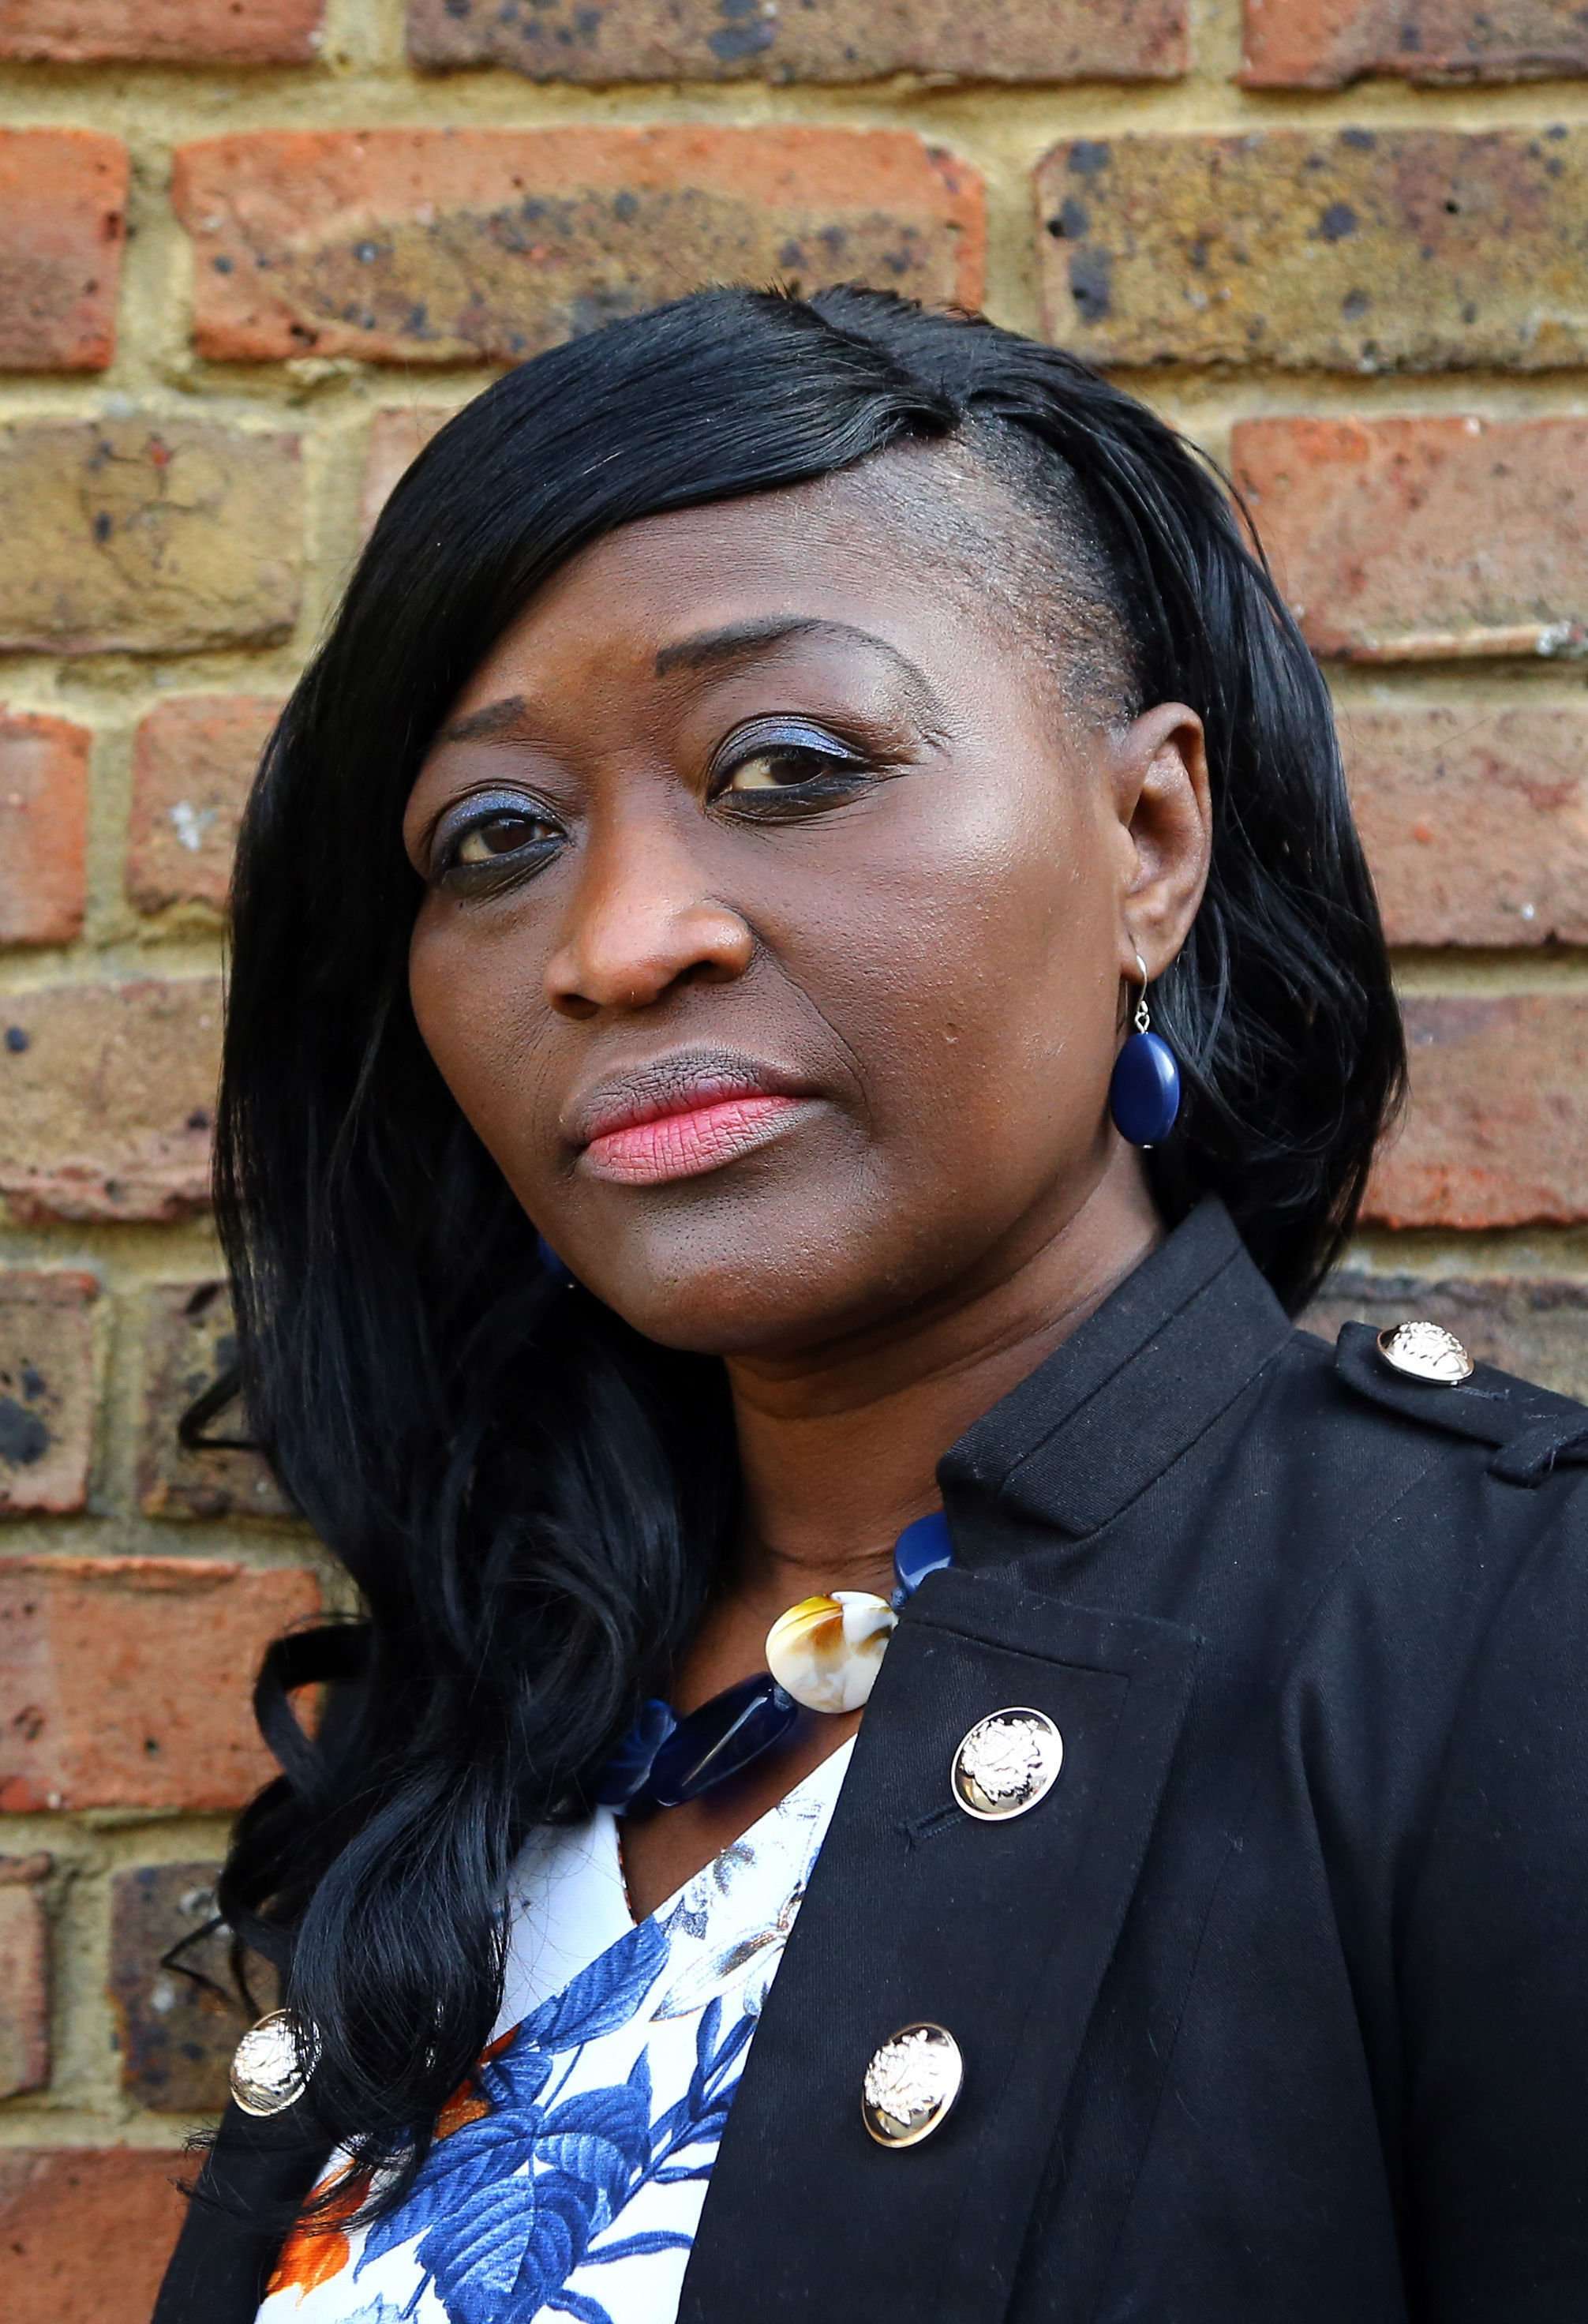 image for Christian nurse Sarah Kuteh sacked after telling cancer patient he had better chance of survival if he prayed to God (From News Shopper)